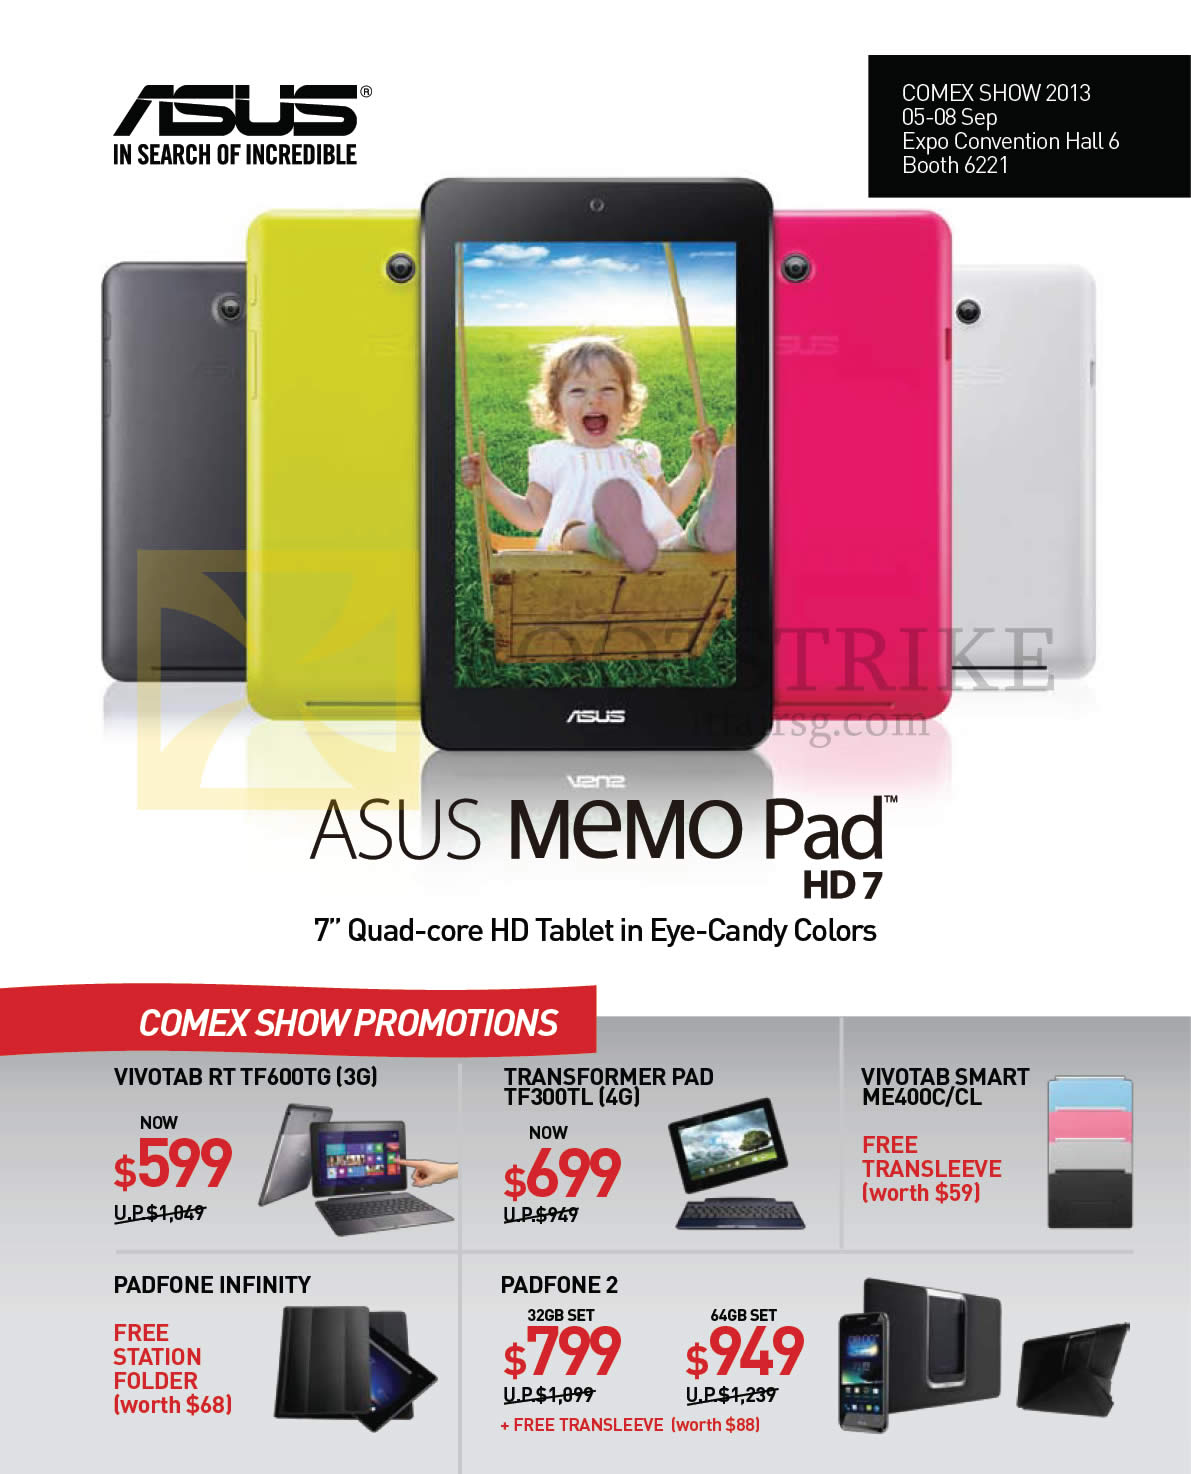 COMEX 2013 price list image brochure of ASUS Notebooks Tablets Promotions, Vivotab RT, Smart, Transformer Pad, Padfone Infinity, 2